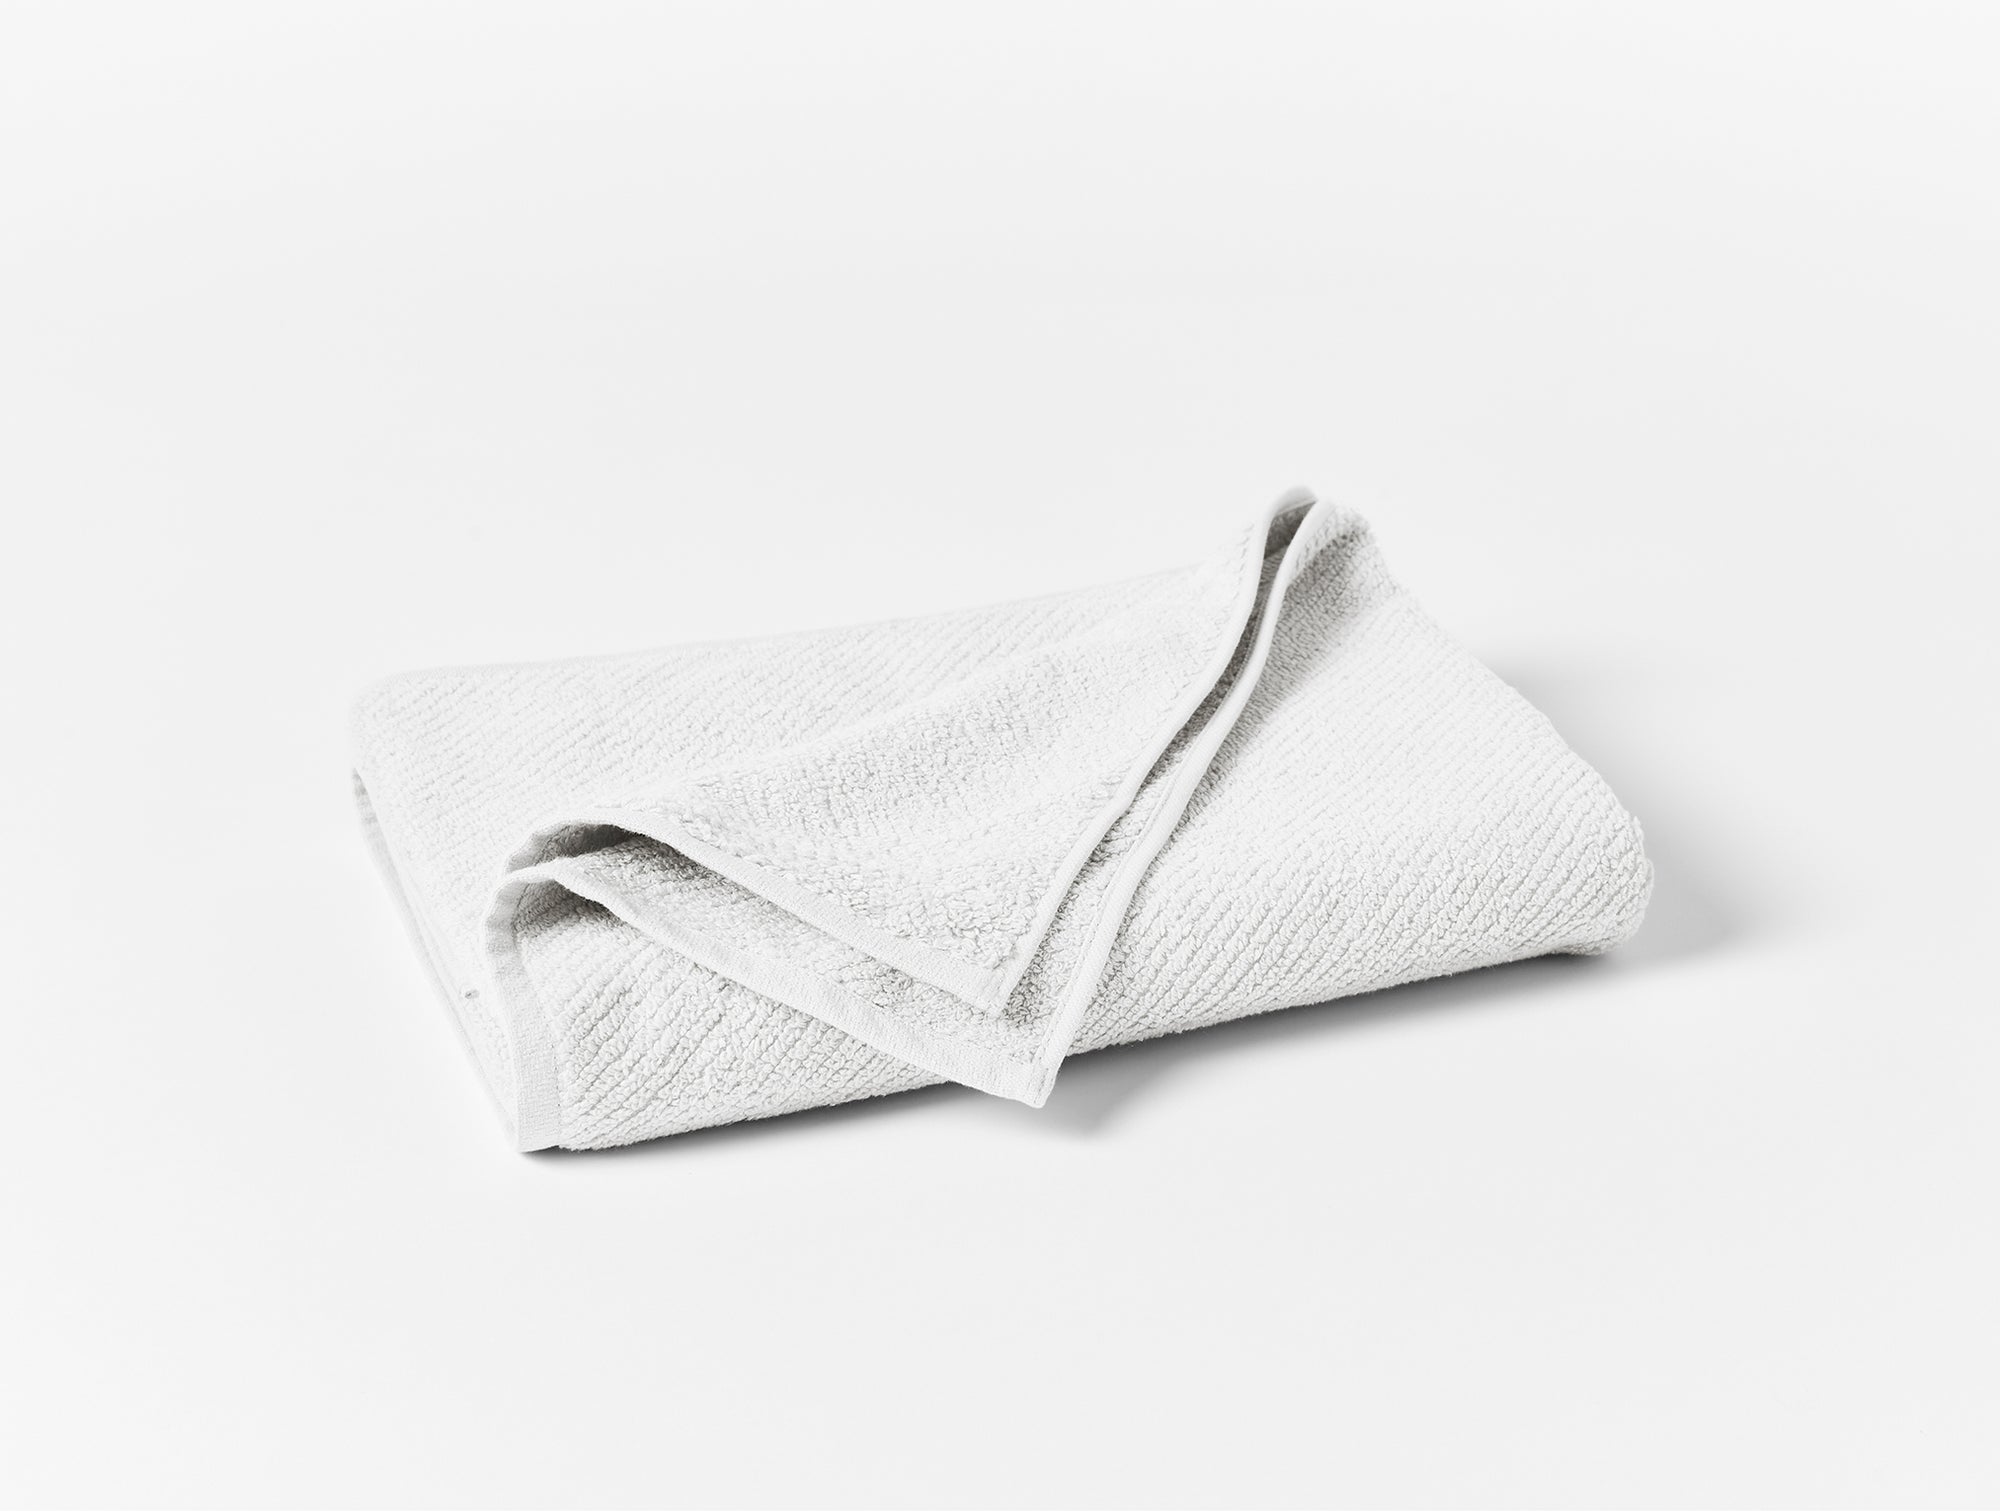 Grey Quick Dry Performance Cotton Hand Towel Sold by at Home